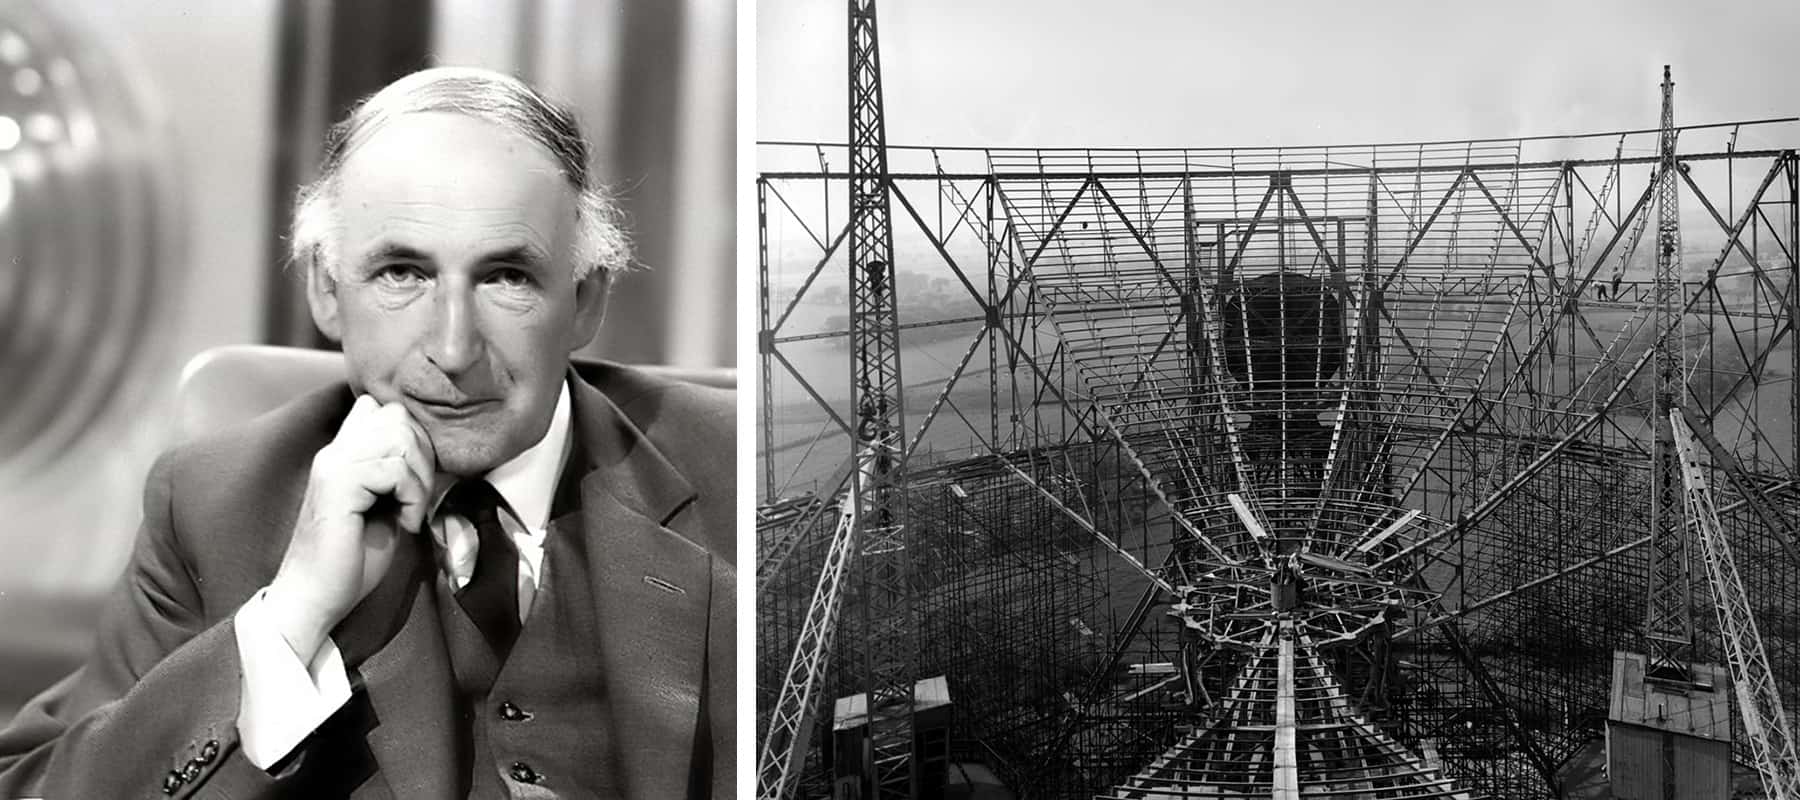 Two black and white photos: a man in a suit and a large telescope under construction